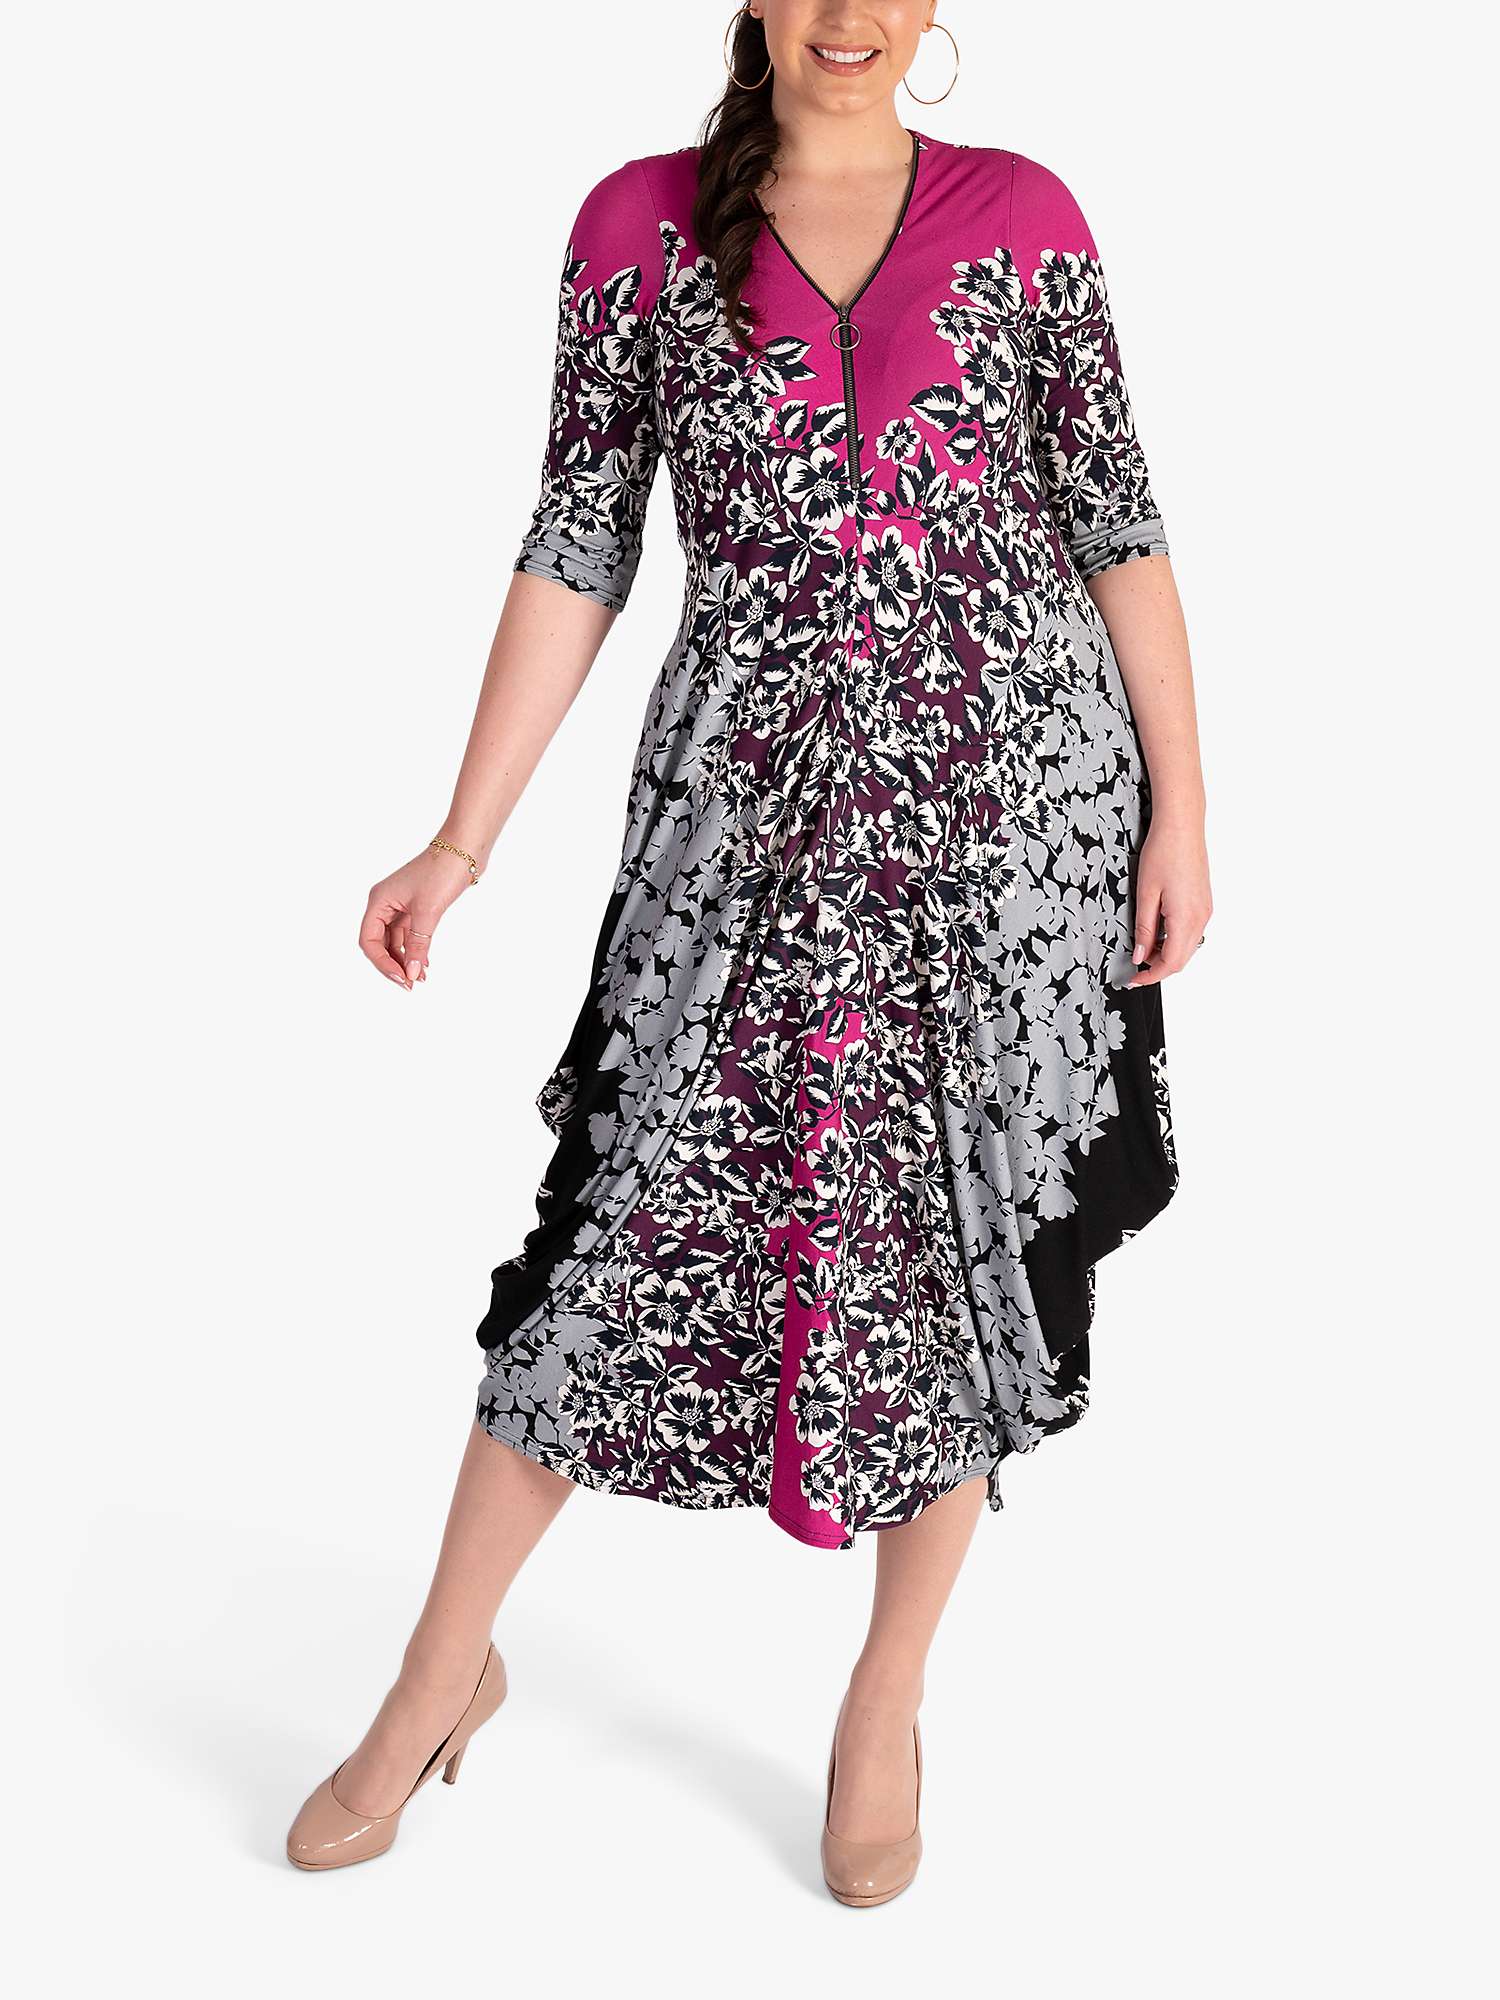 Buy chesca Floral Print Jersey Dress, Fuchsia/Grey Online at johnlewis.com